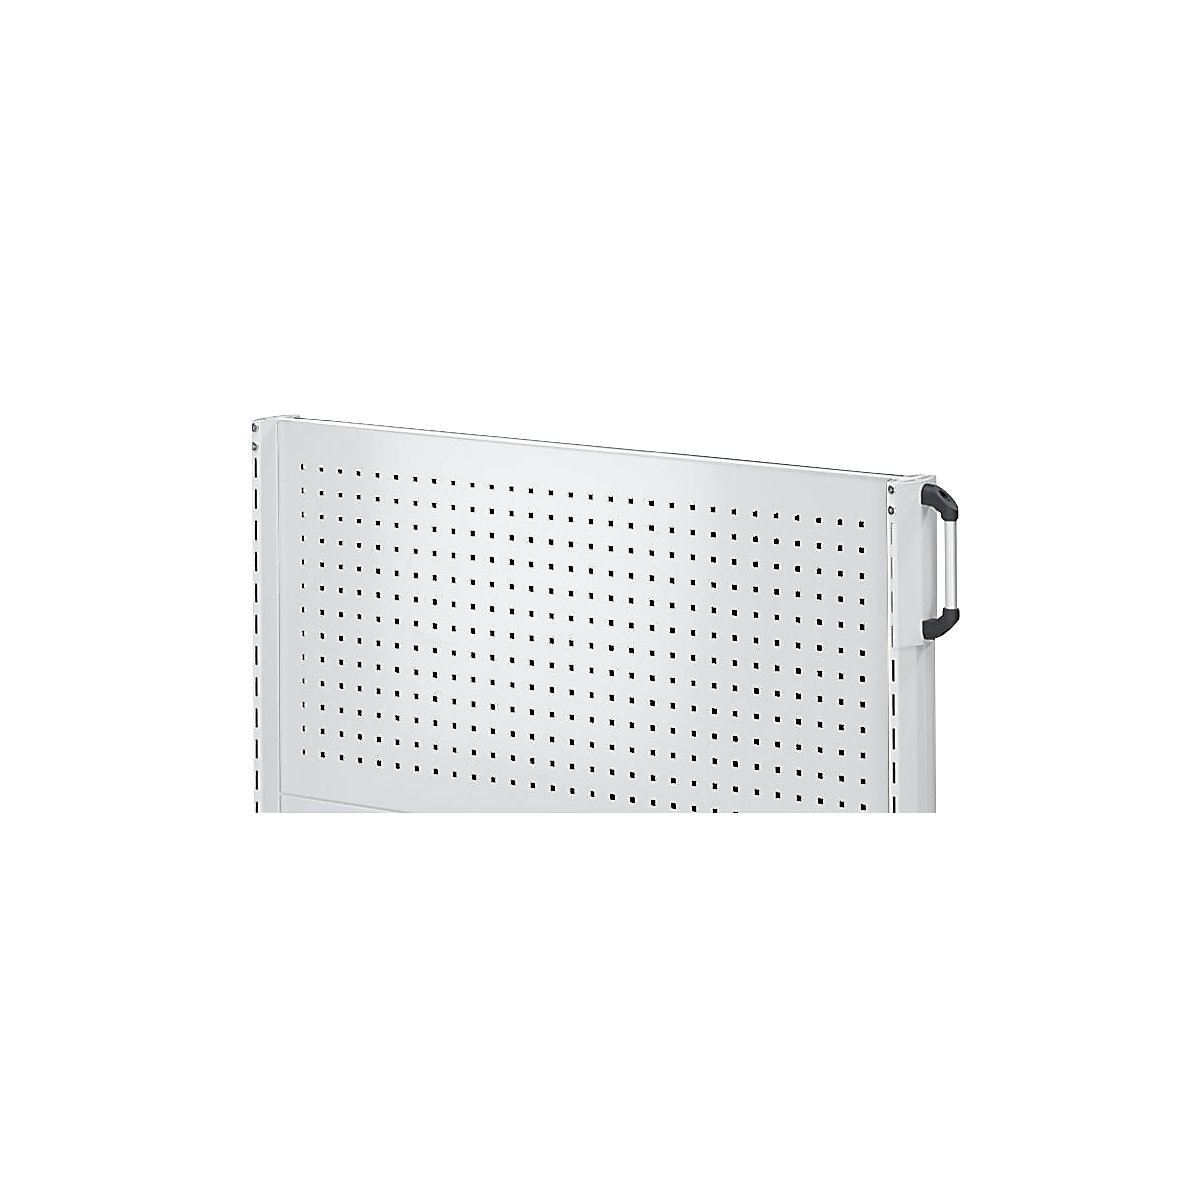 Perforated panel – ANKE, width 600 mm, length 800 mm, grey-4